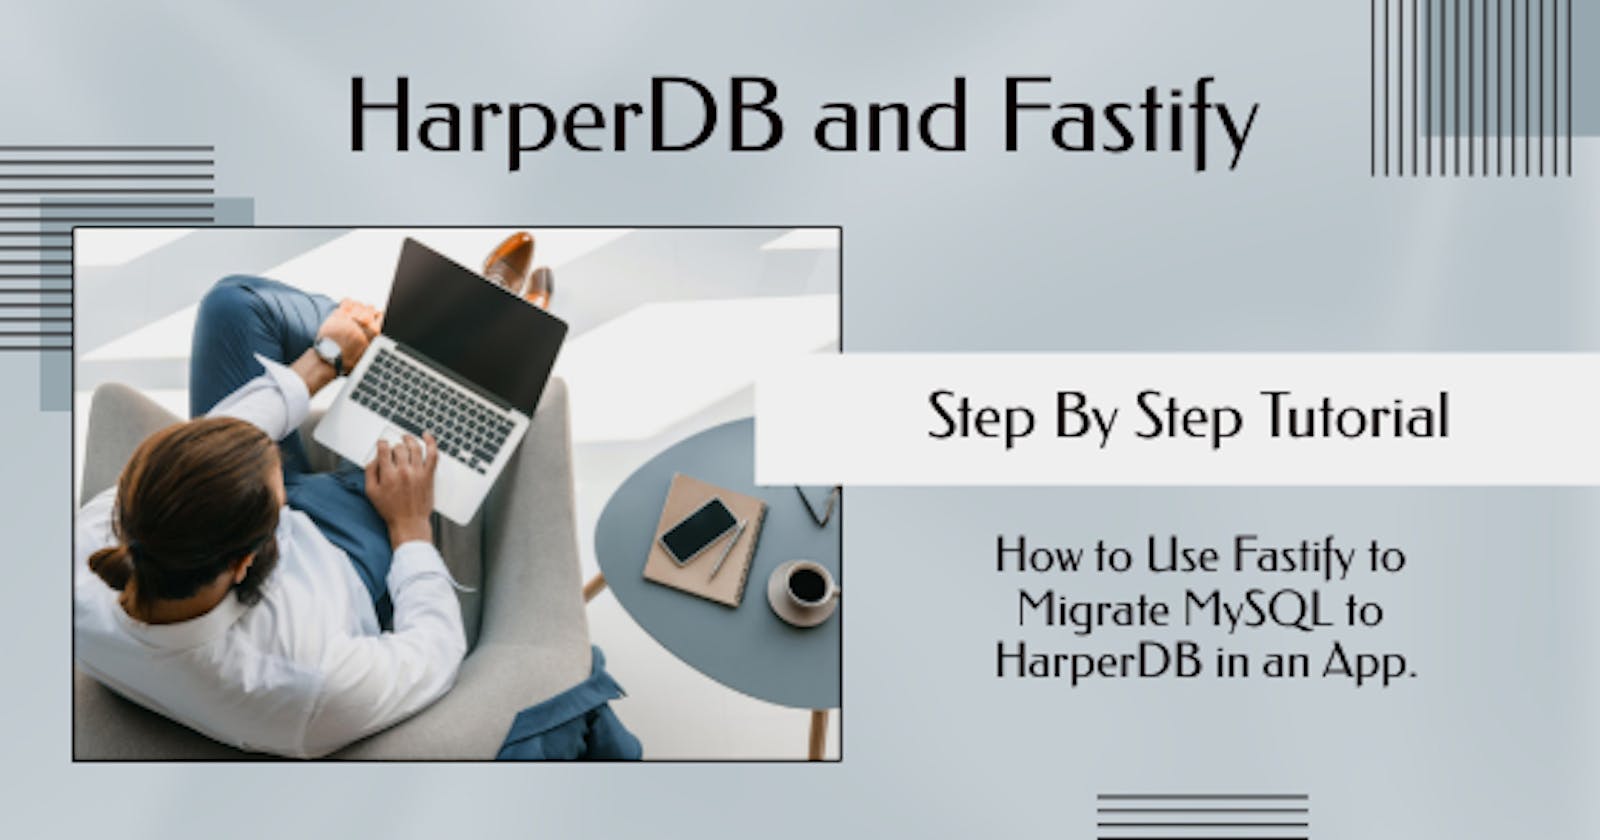 How to Use Fastify to Migrate MySQL to HarperDB in an App.